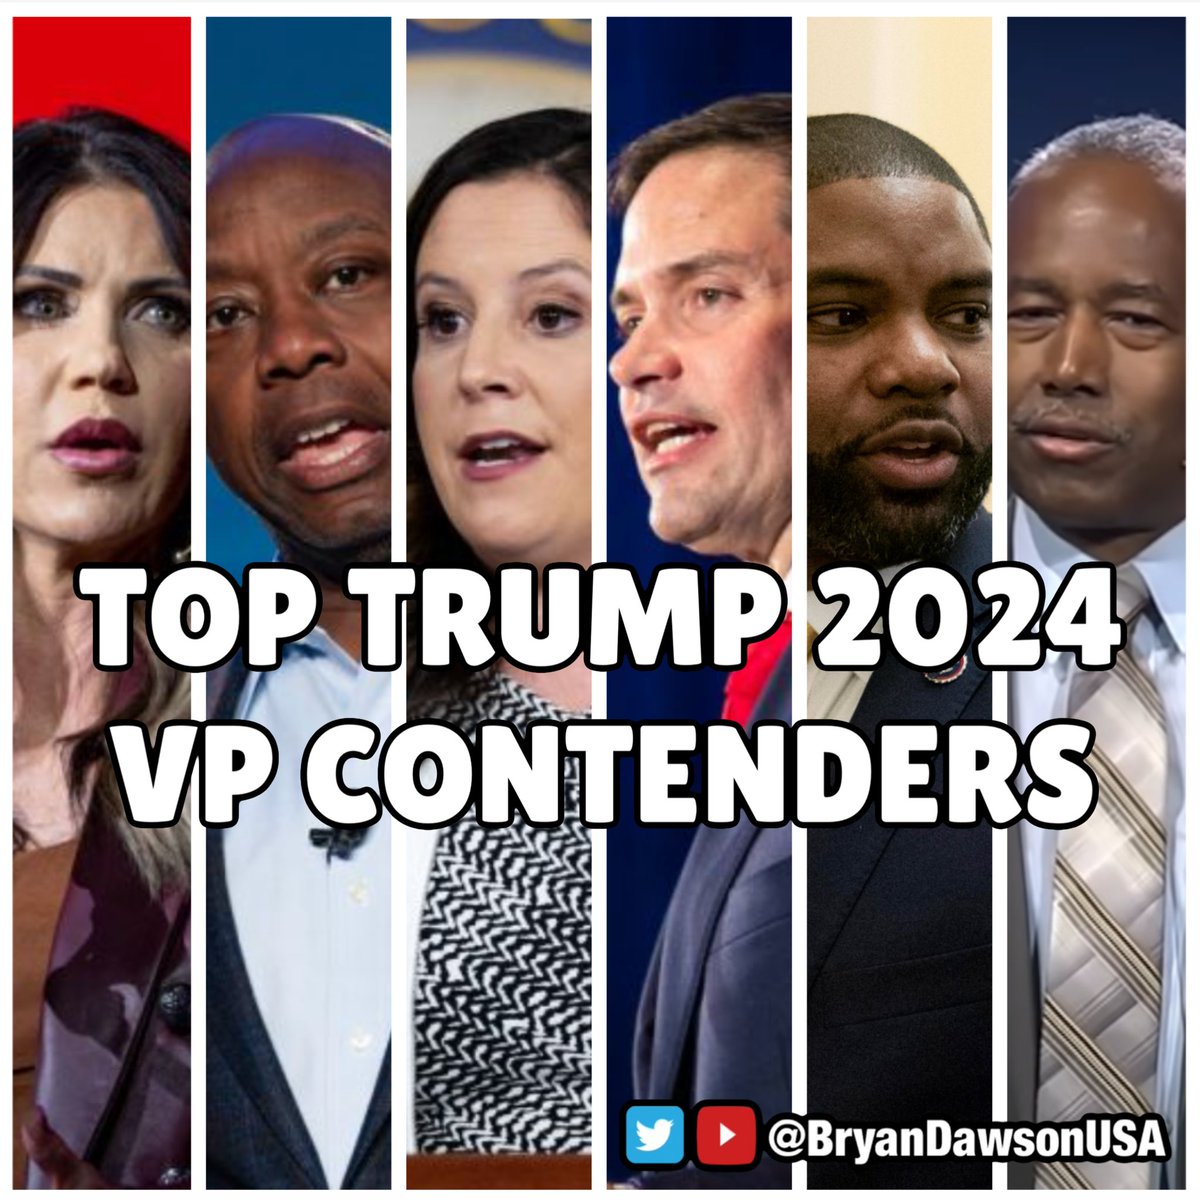 1) A brief analysis on the top contenders for Donald Trump's Vice Presidential nomination. They are all perfect, model Republicans. Trump has a tough decision to make! Who will he pick? #Trump2024